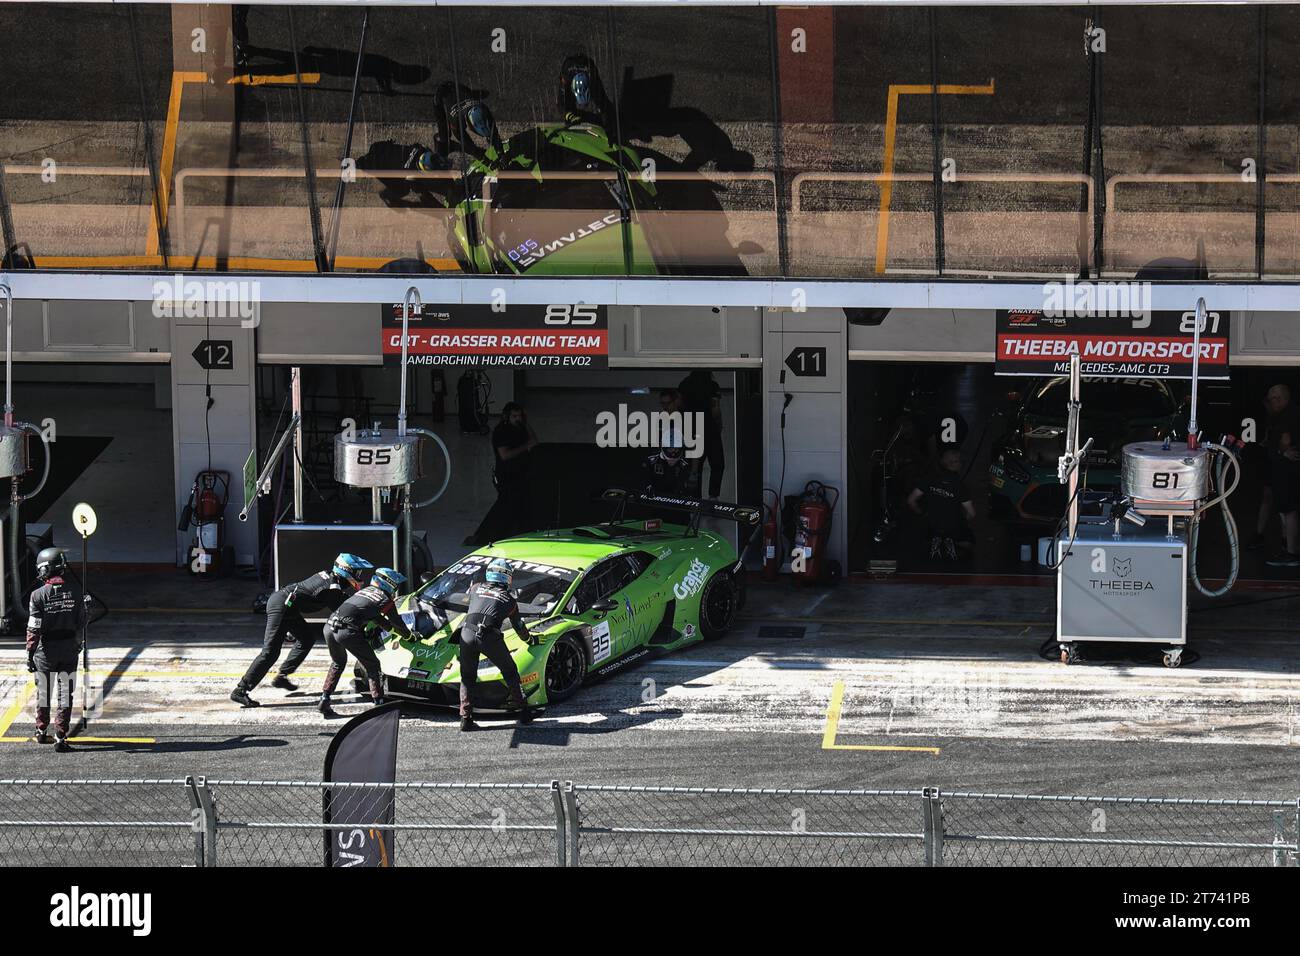 Pit stops in the Pit Lane at Festival of Speed (Festival de Velocidad)motor racing event at Circuit of Catalonia, Barcelona, Spain - 30 September 2023 Stock Photo